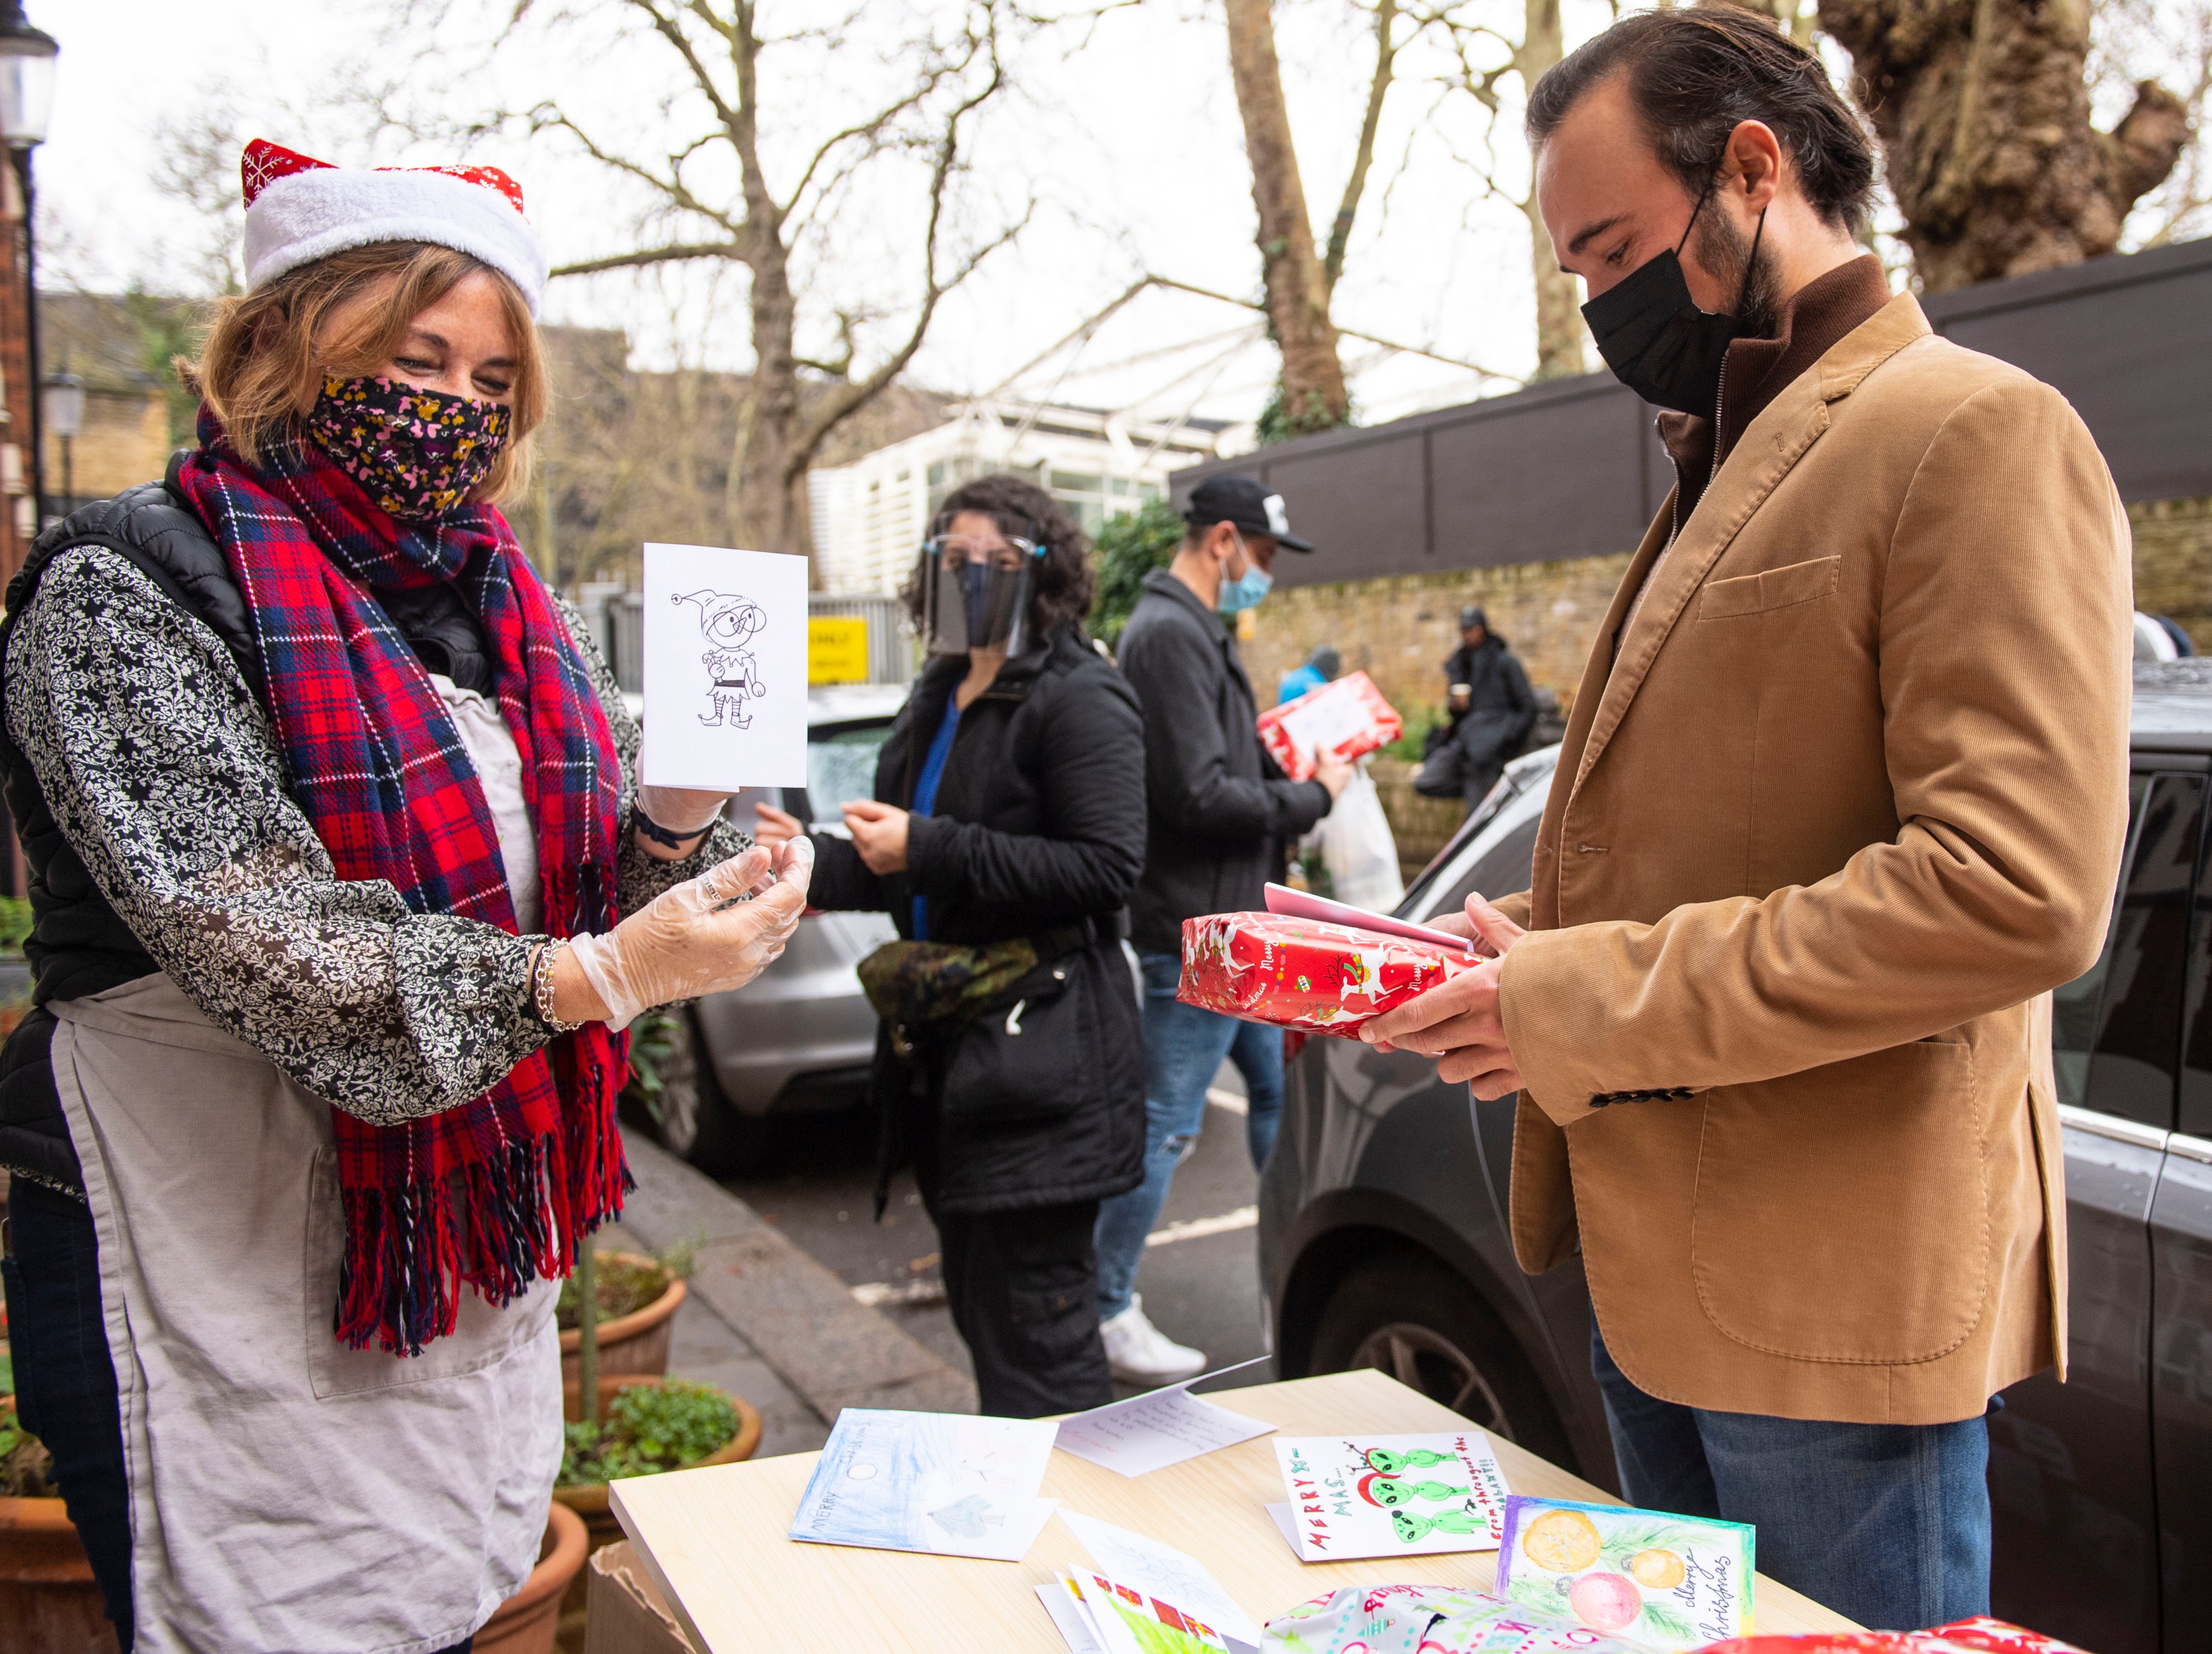 Evgeny Lebedev joined volunteers at Refettorio Felix at St Cuthberts to hand out Christmas gifts